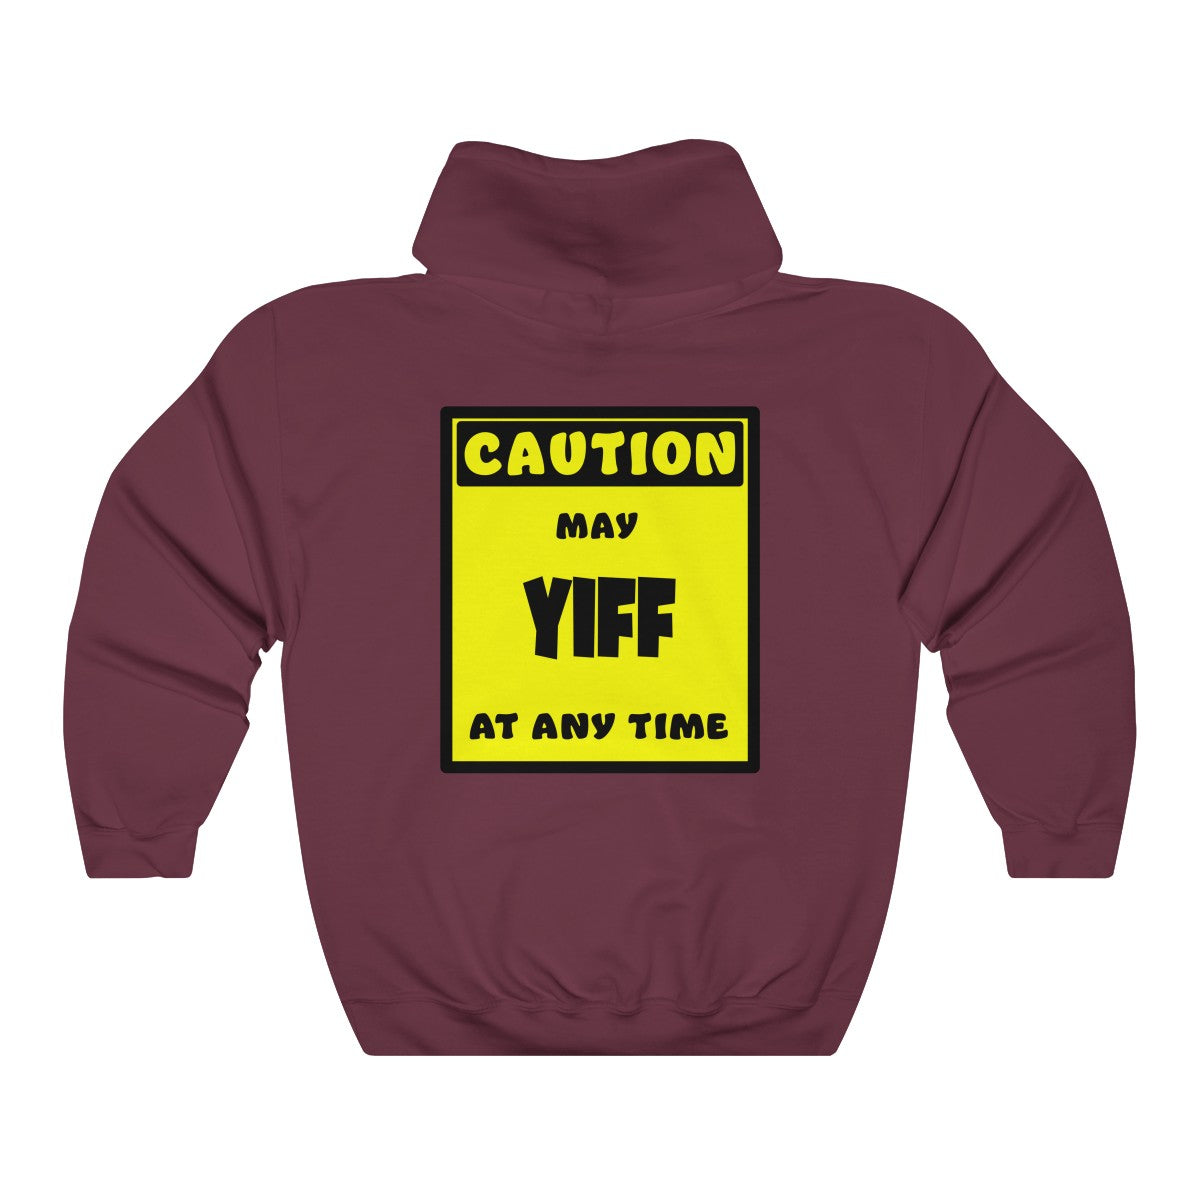 CAUTION! May YIFF at any time! - Hoodie Hoodie AFLT-Whootorca Maroon S 